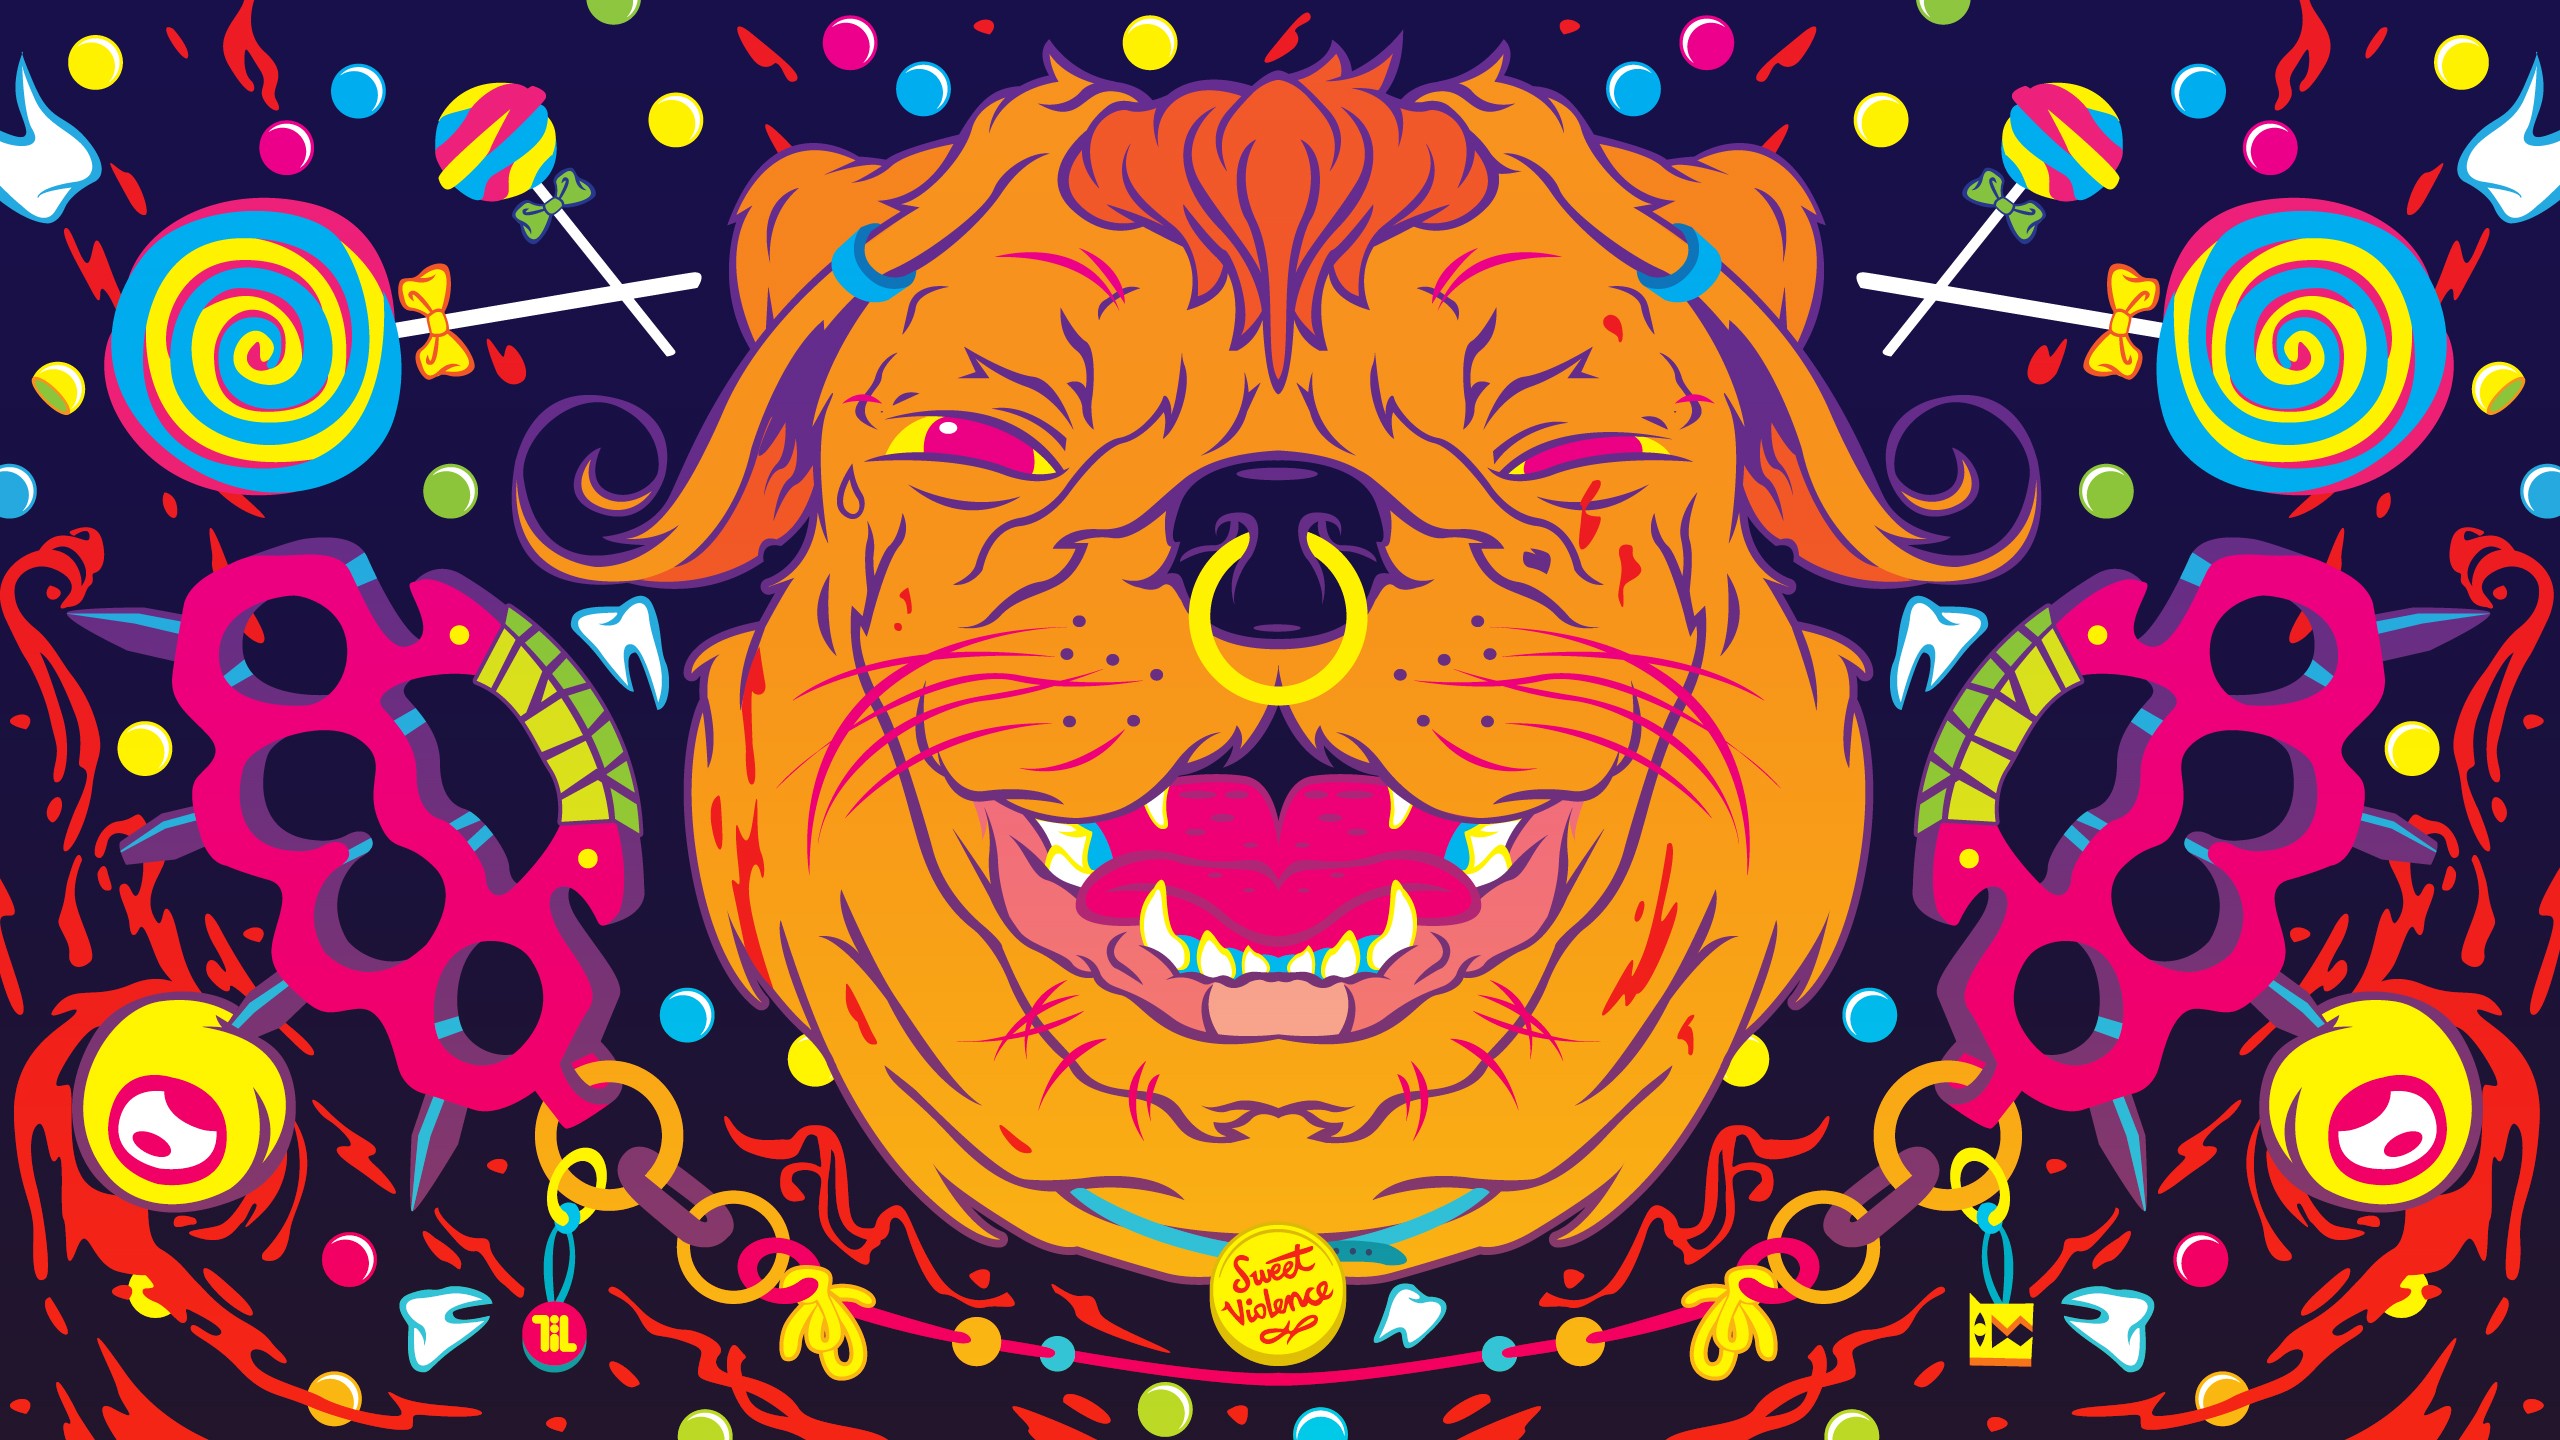 HD Trippy Psychedelic Dog Wallpaper HD Full Size - HiReWallpapers 7326